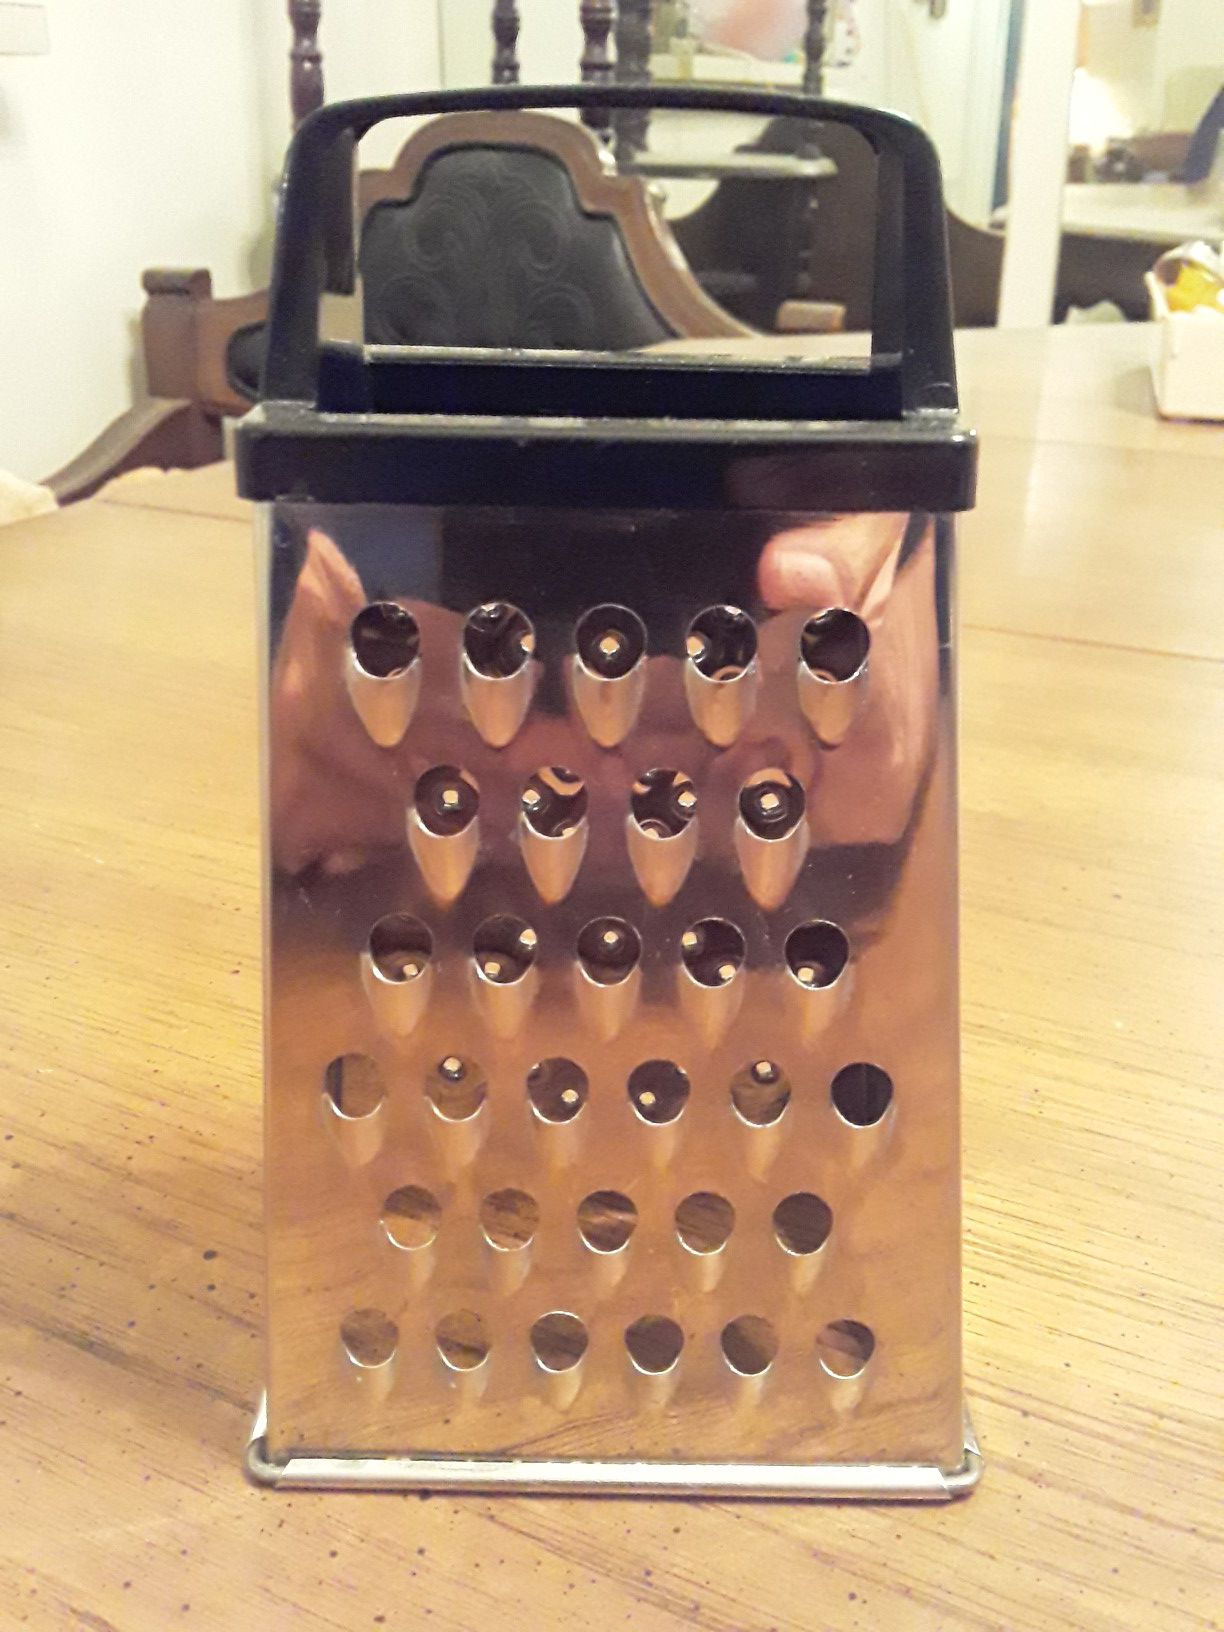 Mini Stainless Steel Four Sided Cheese Grater & Vegetable Slicer- 5 3/4"H